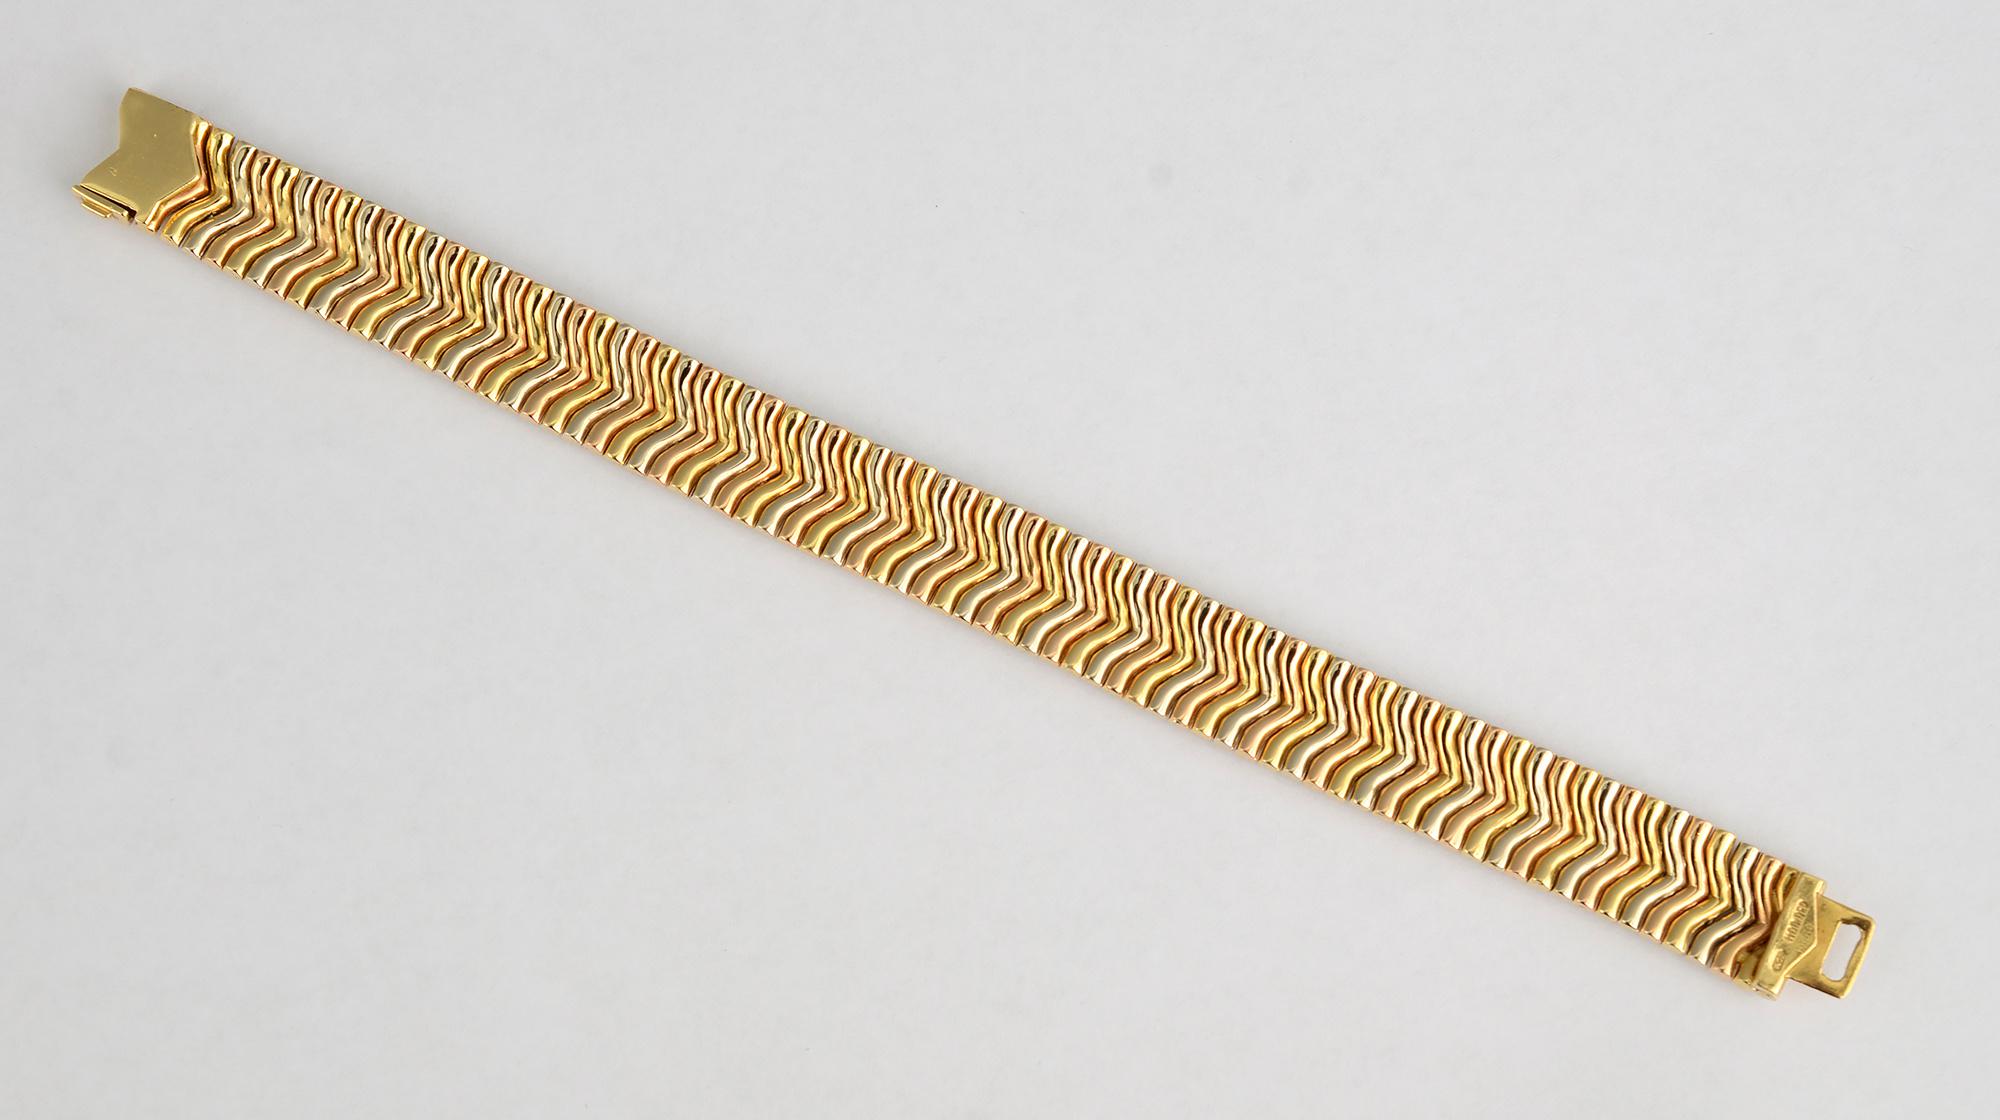 Gucci Tricolor Gold Herringbone Links Bracelet In Excellent Condition For Sale In Darnestown, MD